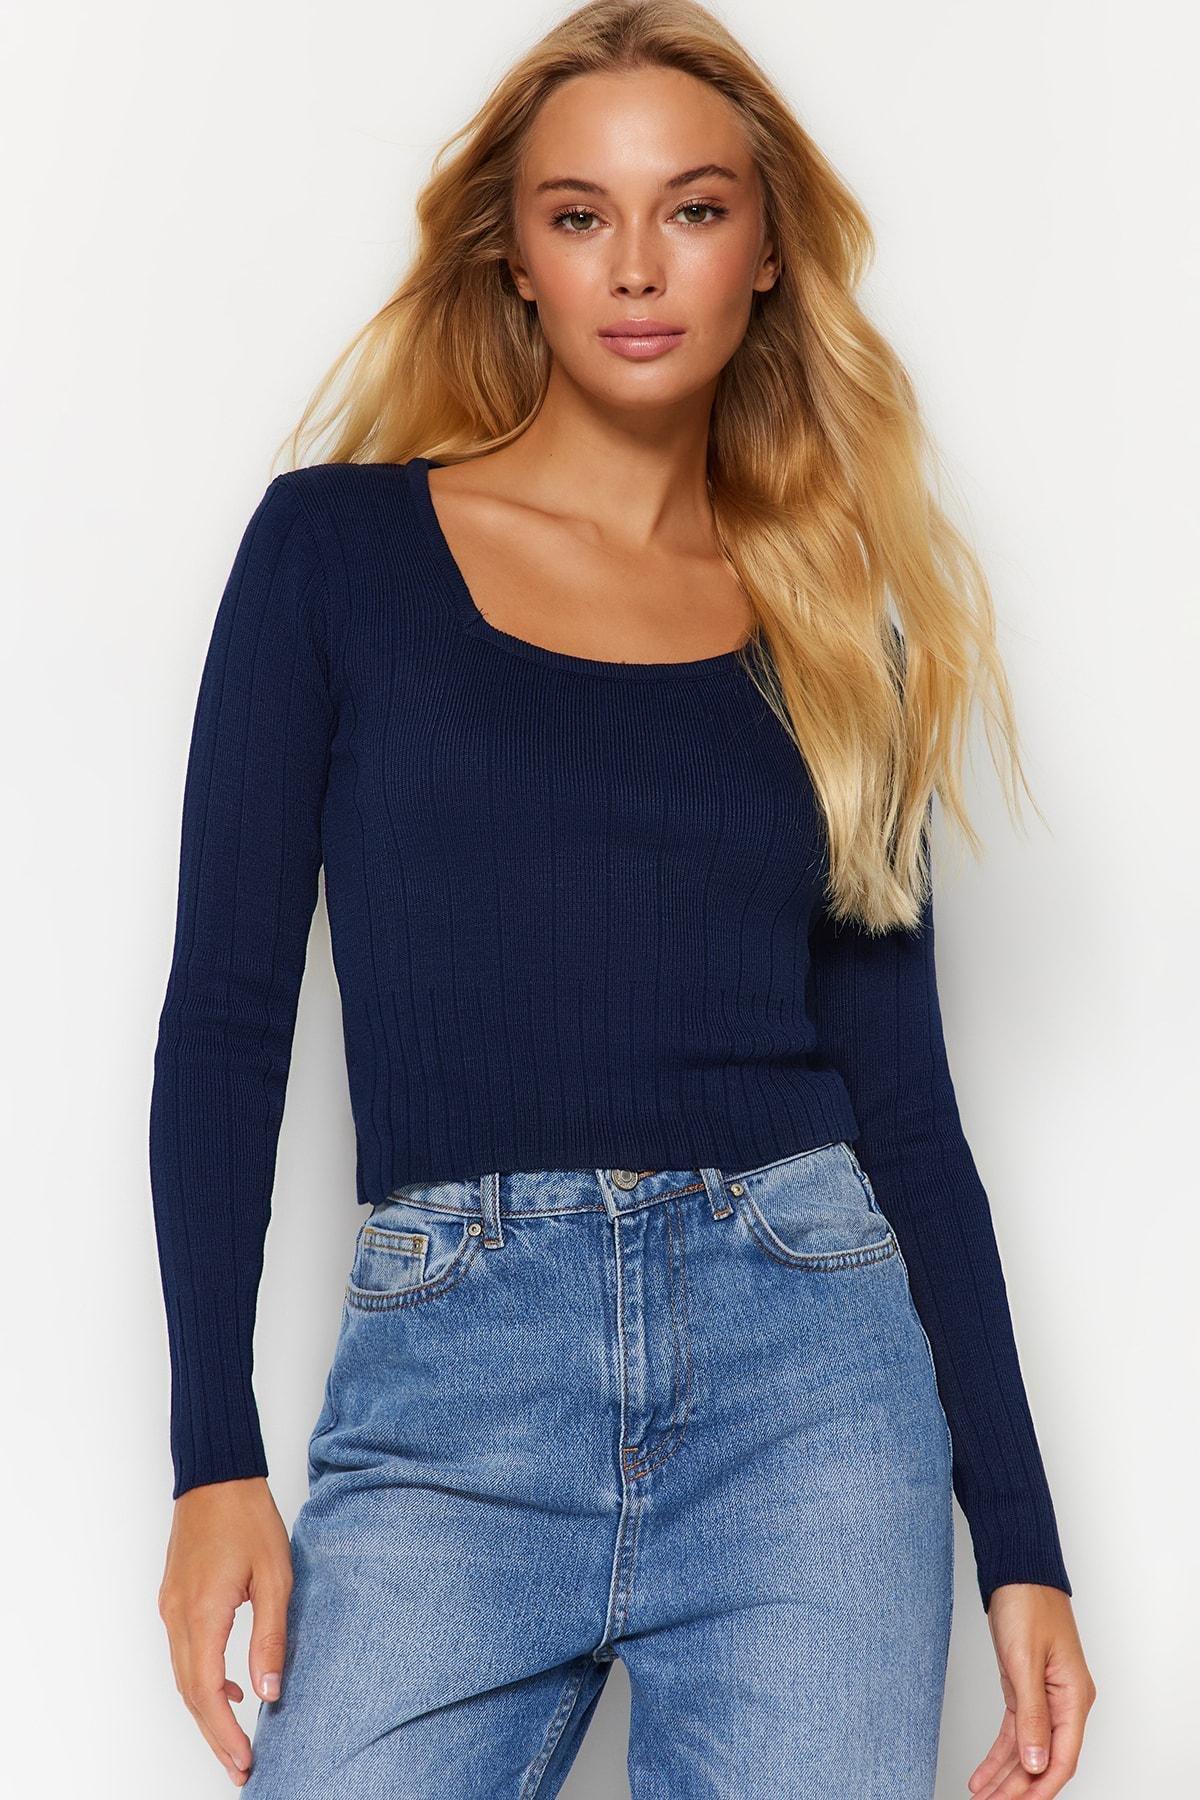 Trendyol - Navy Cropped Knitted Sweater